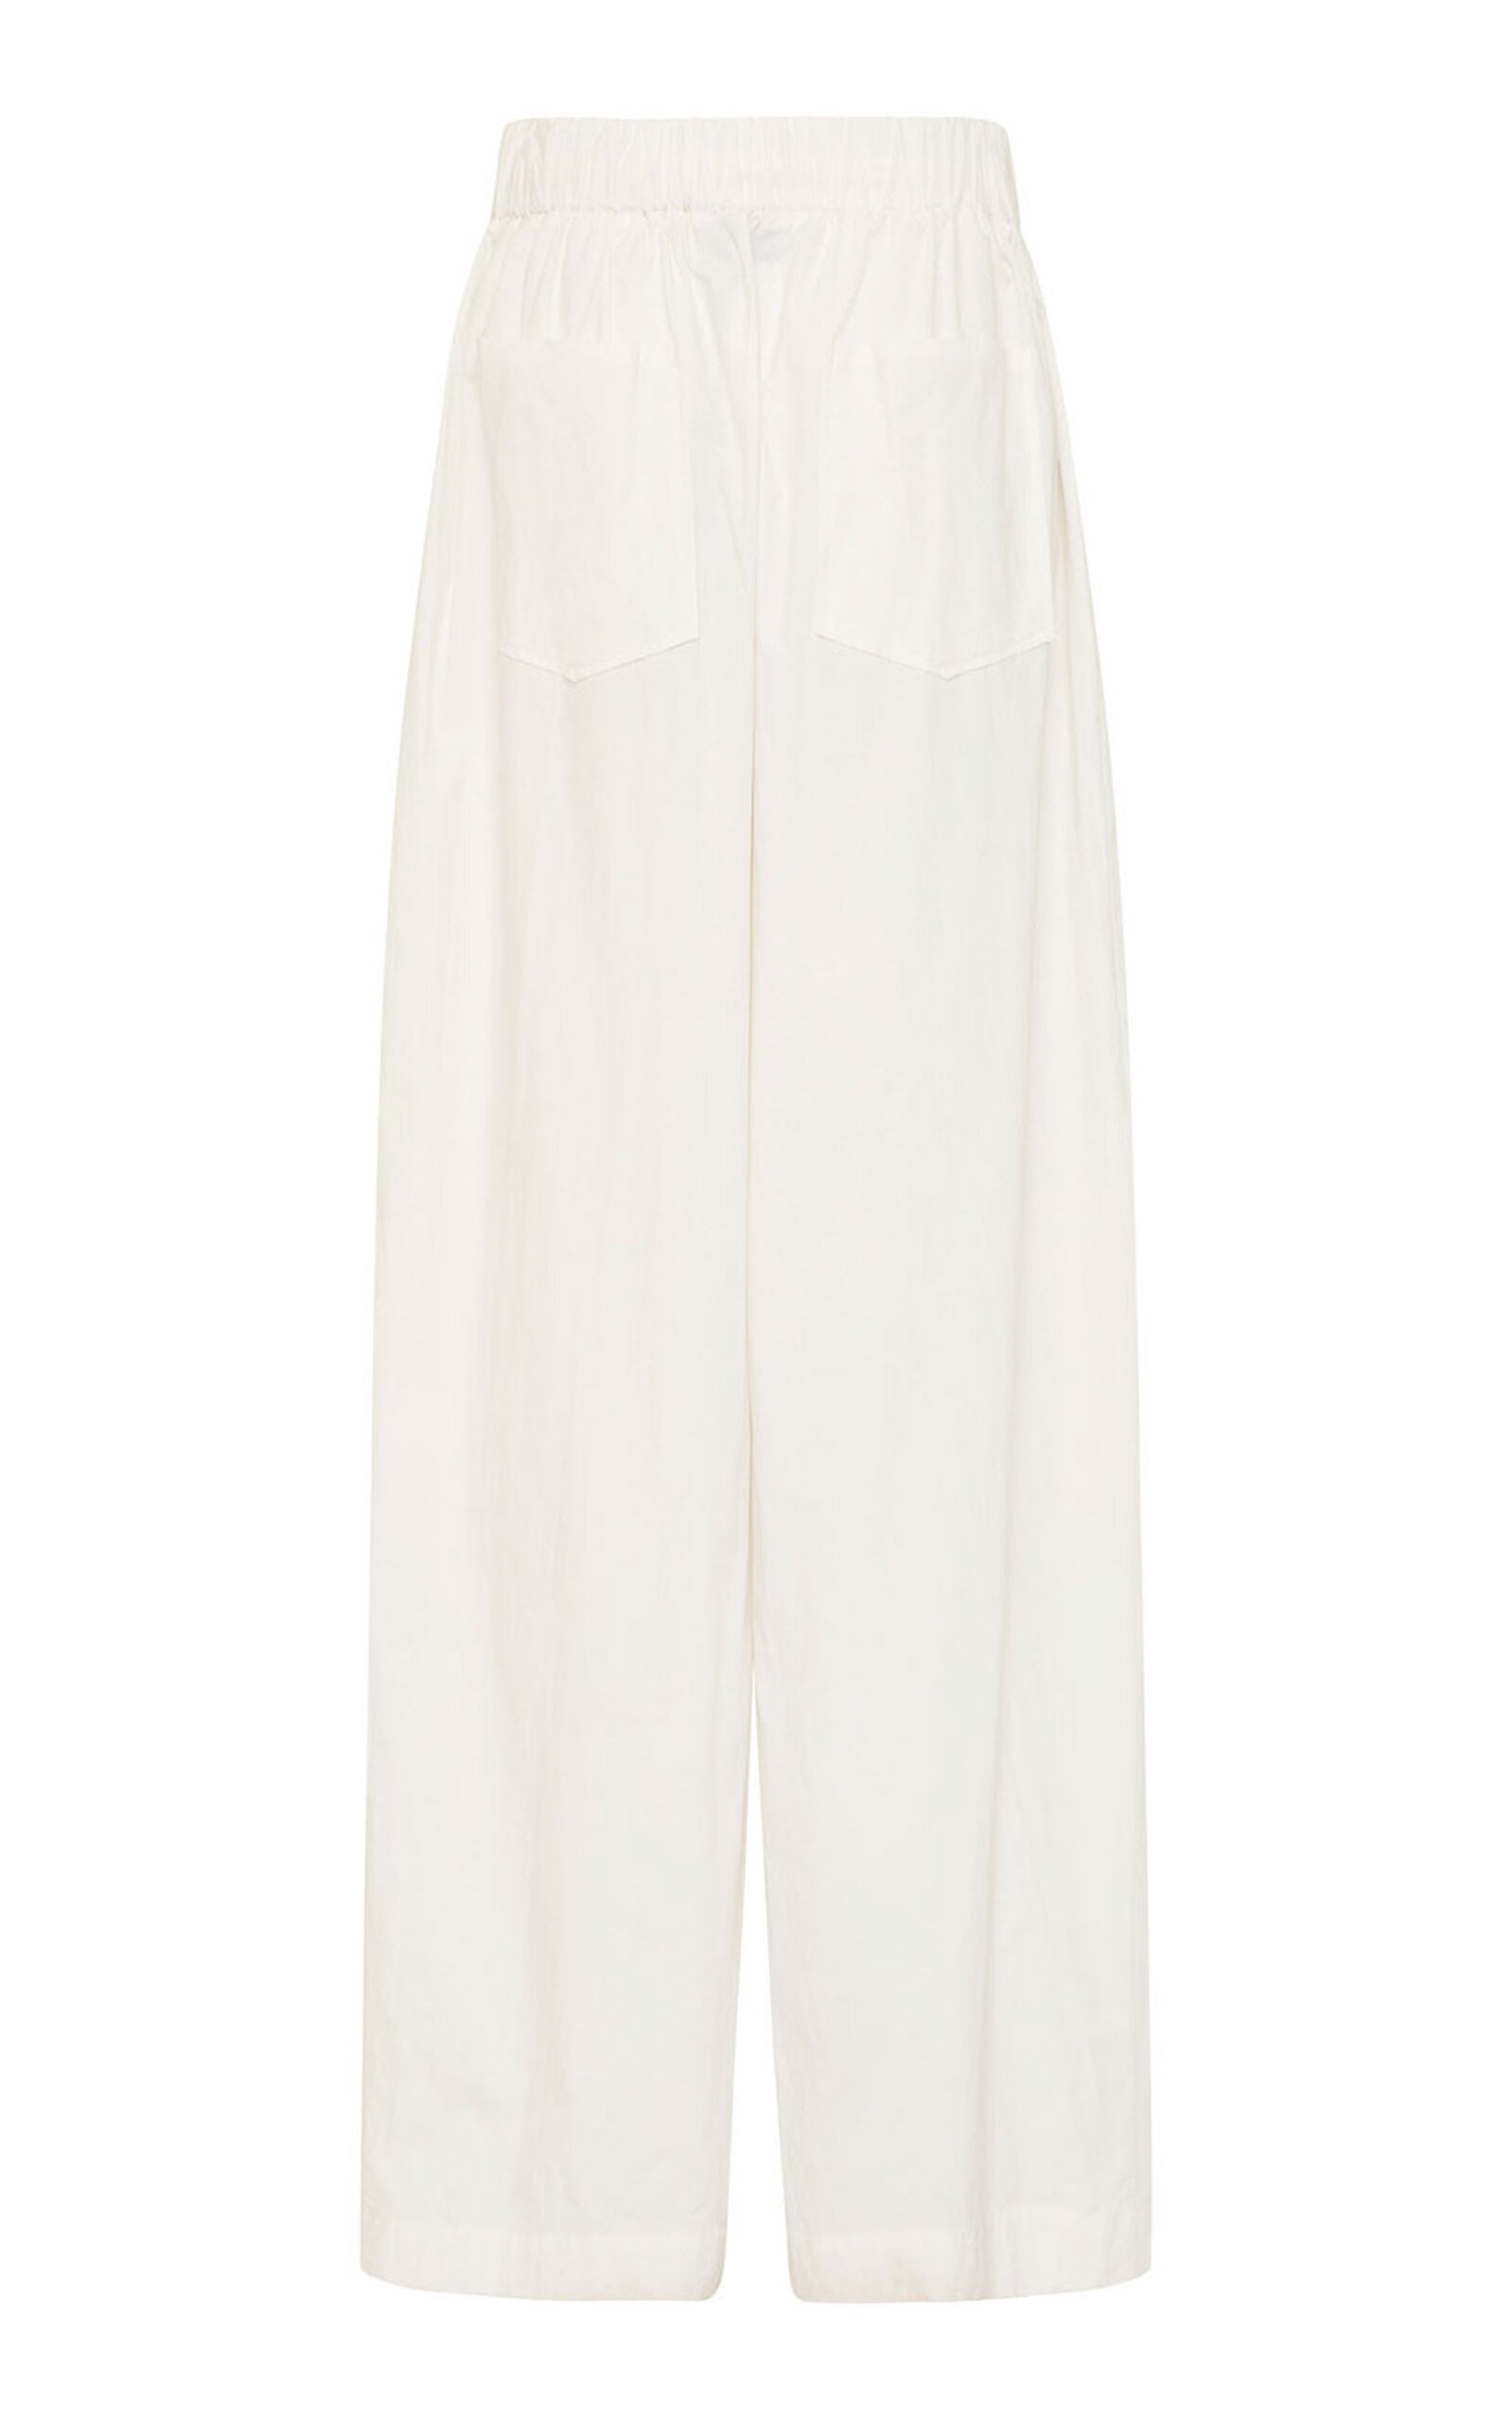 Relaxed Drawstring Cotton Pants white - 4